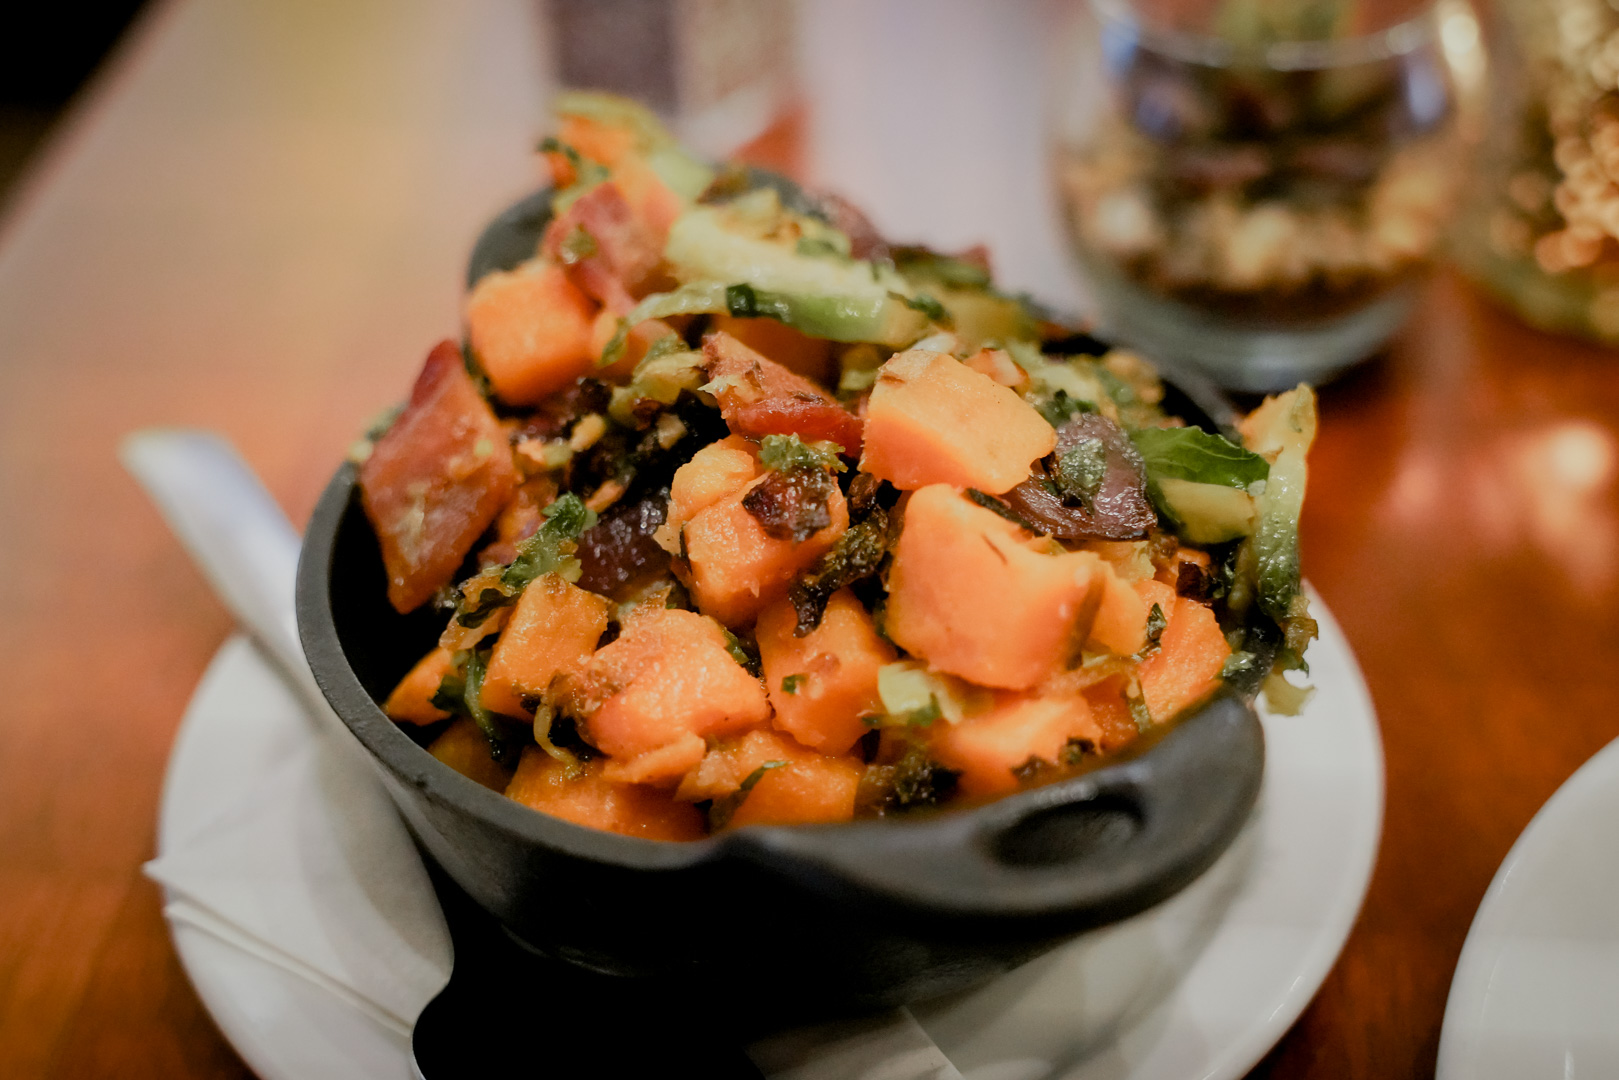 A hot dish served with sweet potato hash